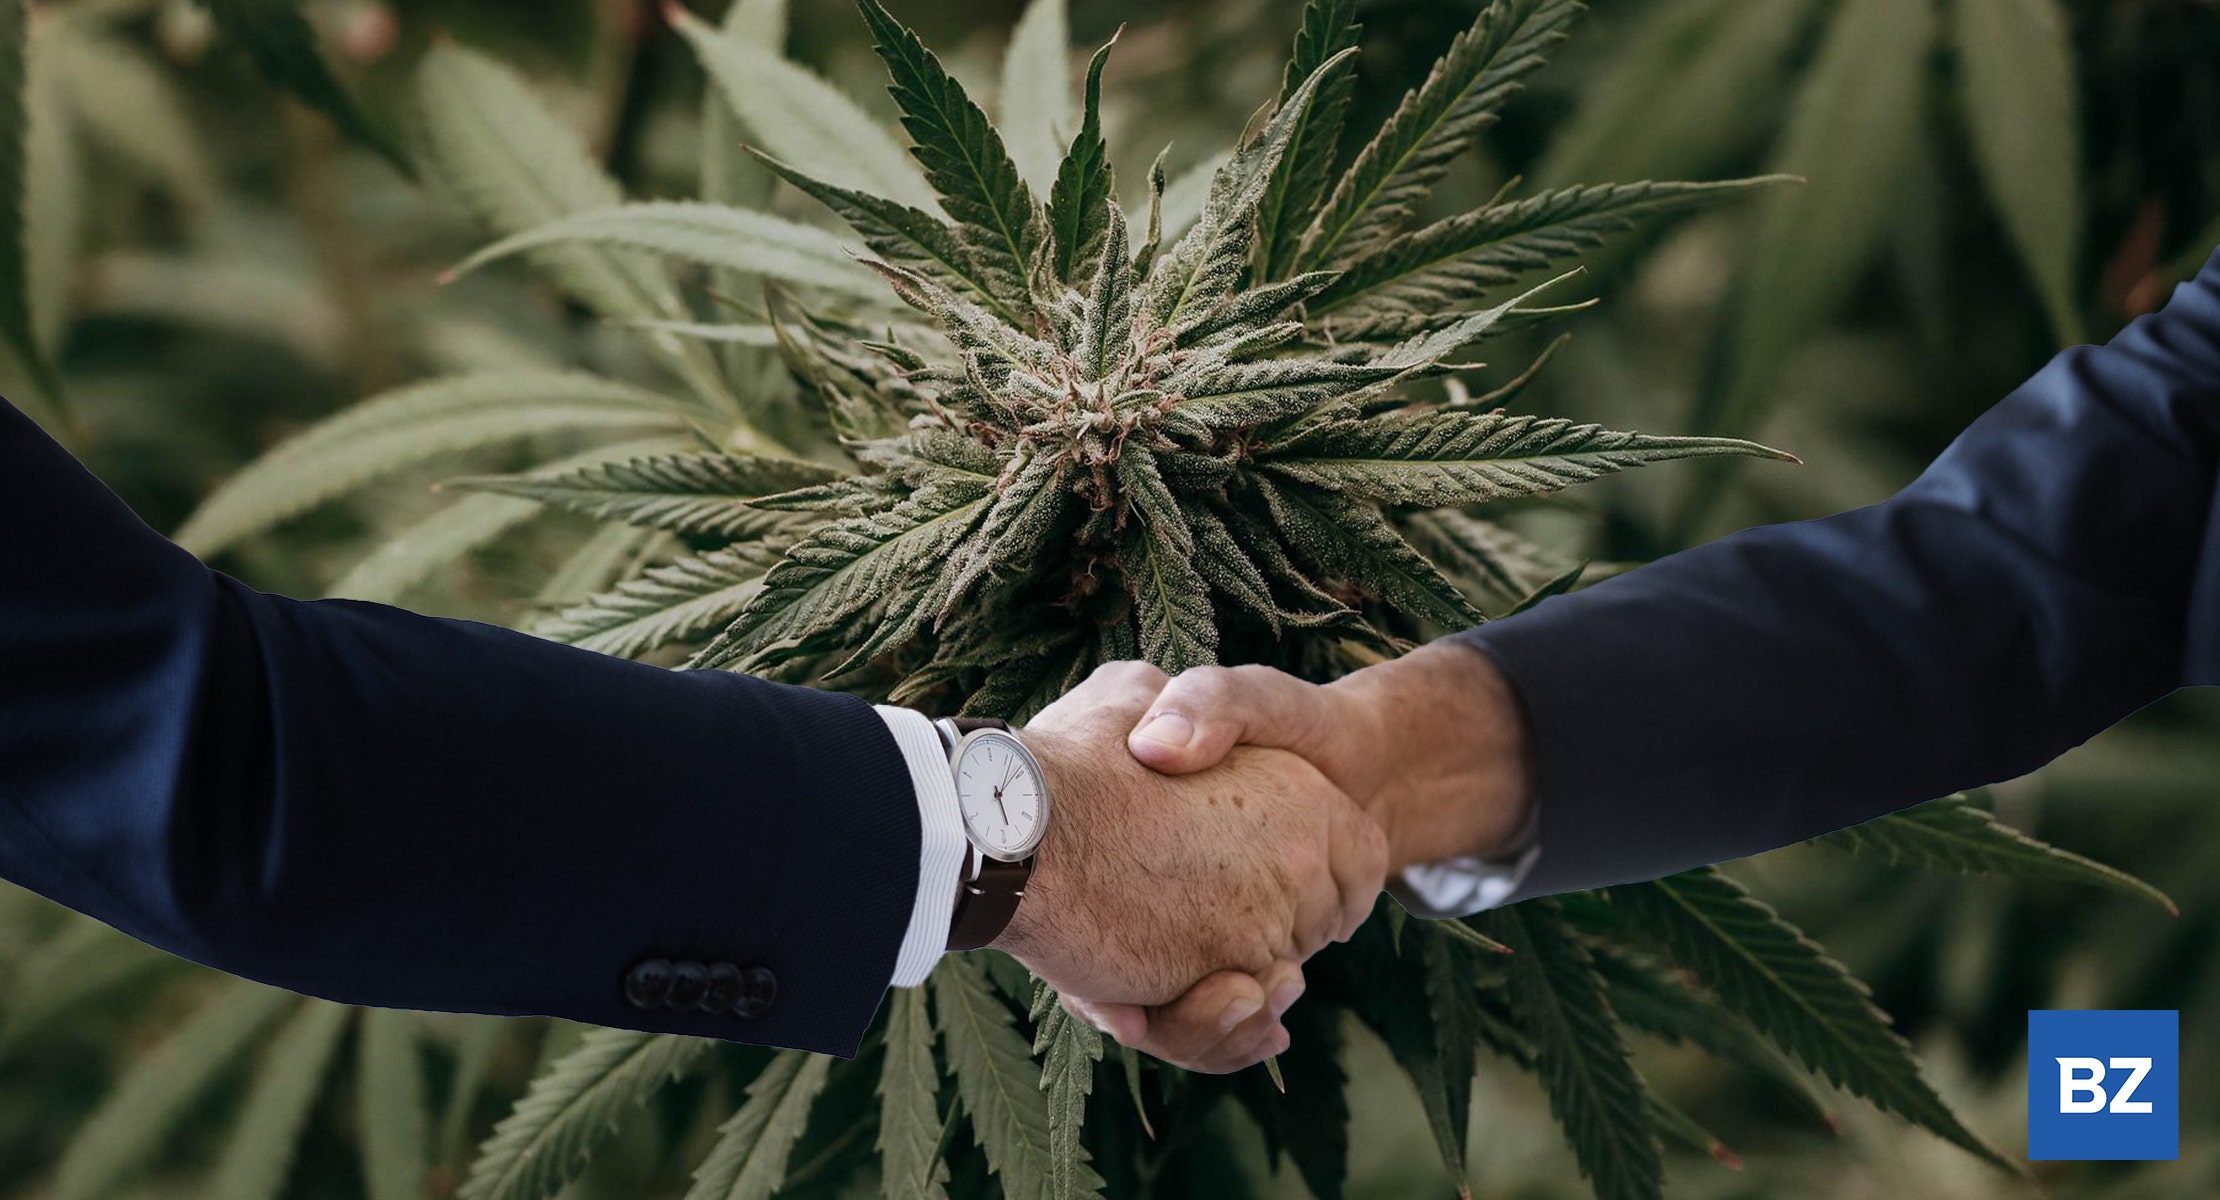 Key Marijuana Executive Changes: Who Will Lead MariMed After CEO's Passing? MJBiz CEO Steps Down